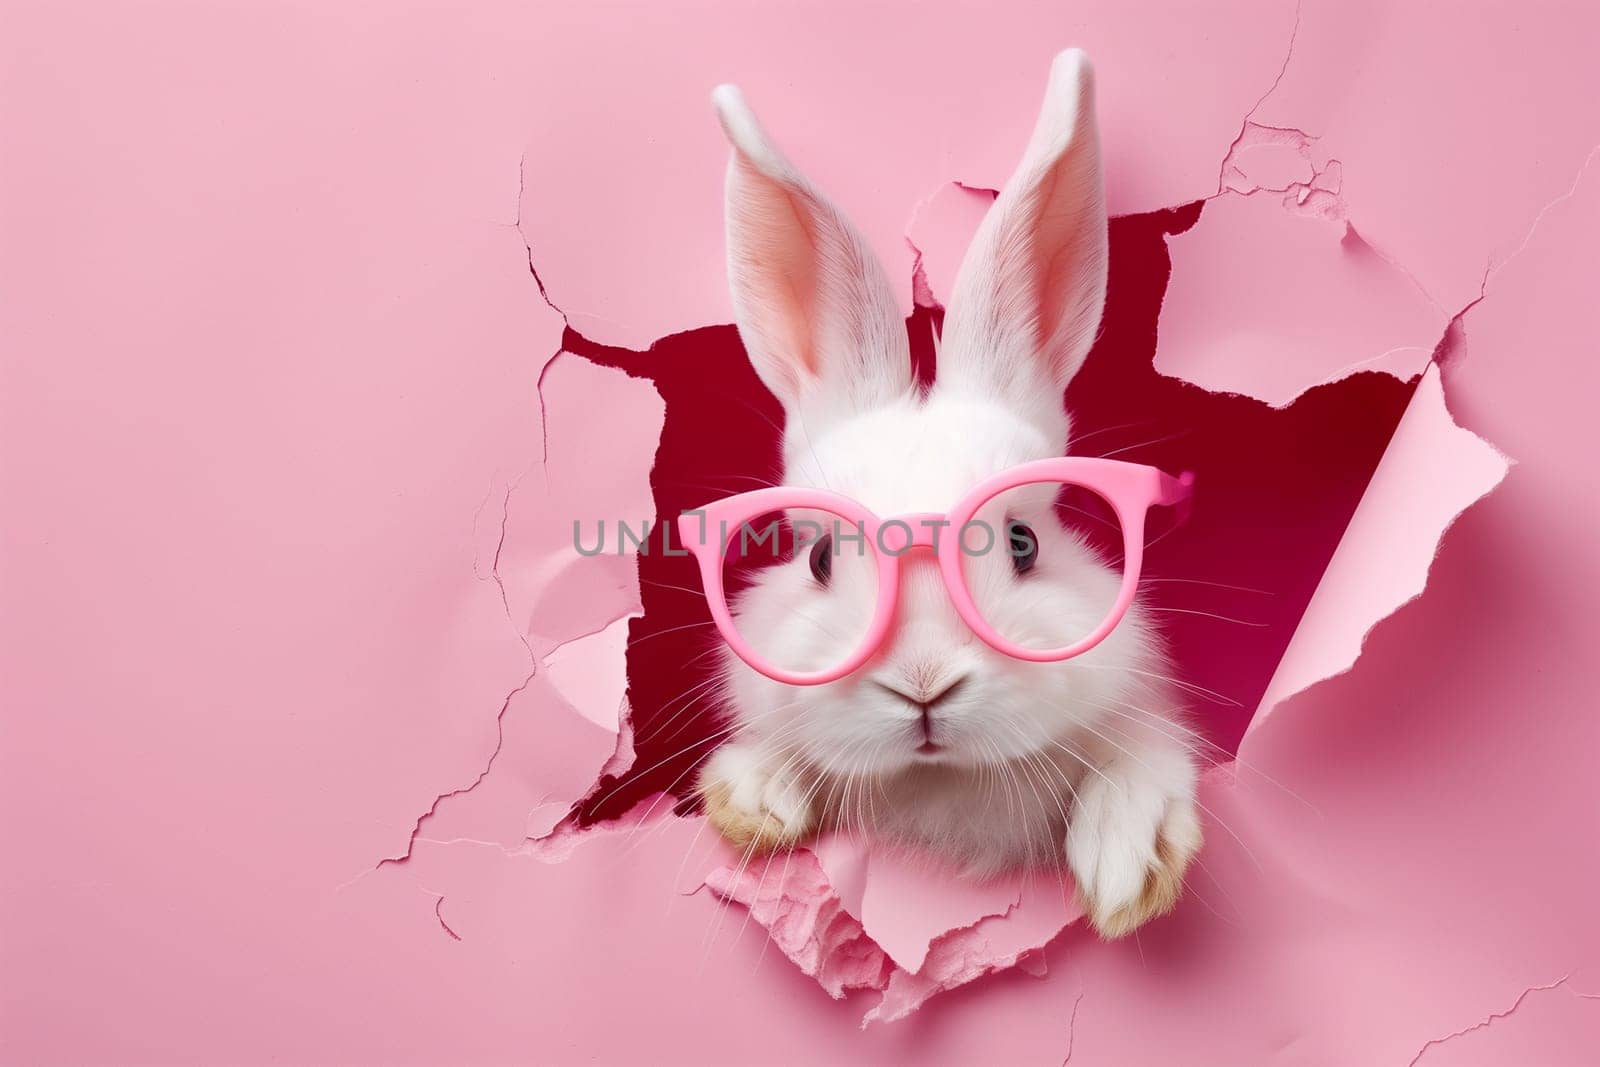 A white rabbit wears pink glasses as it peeks through a hole in a pink wall.